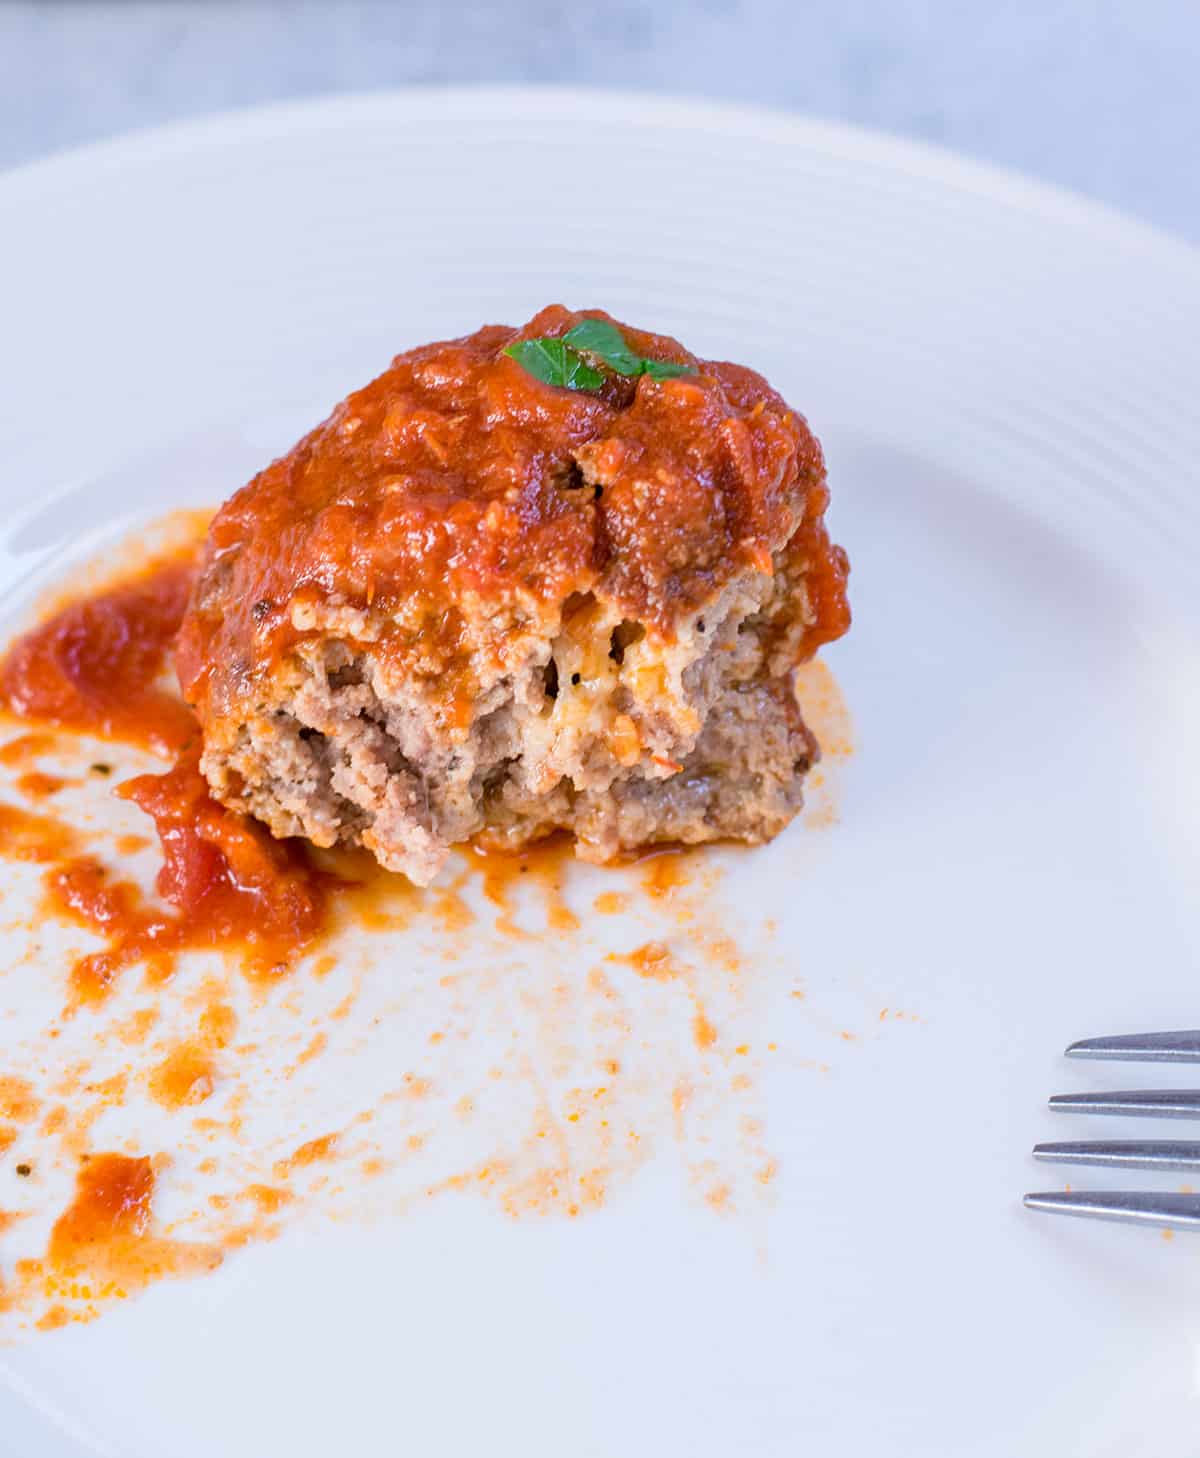 cut open meatball with tomato sauce on white plate